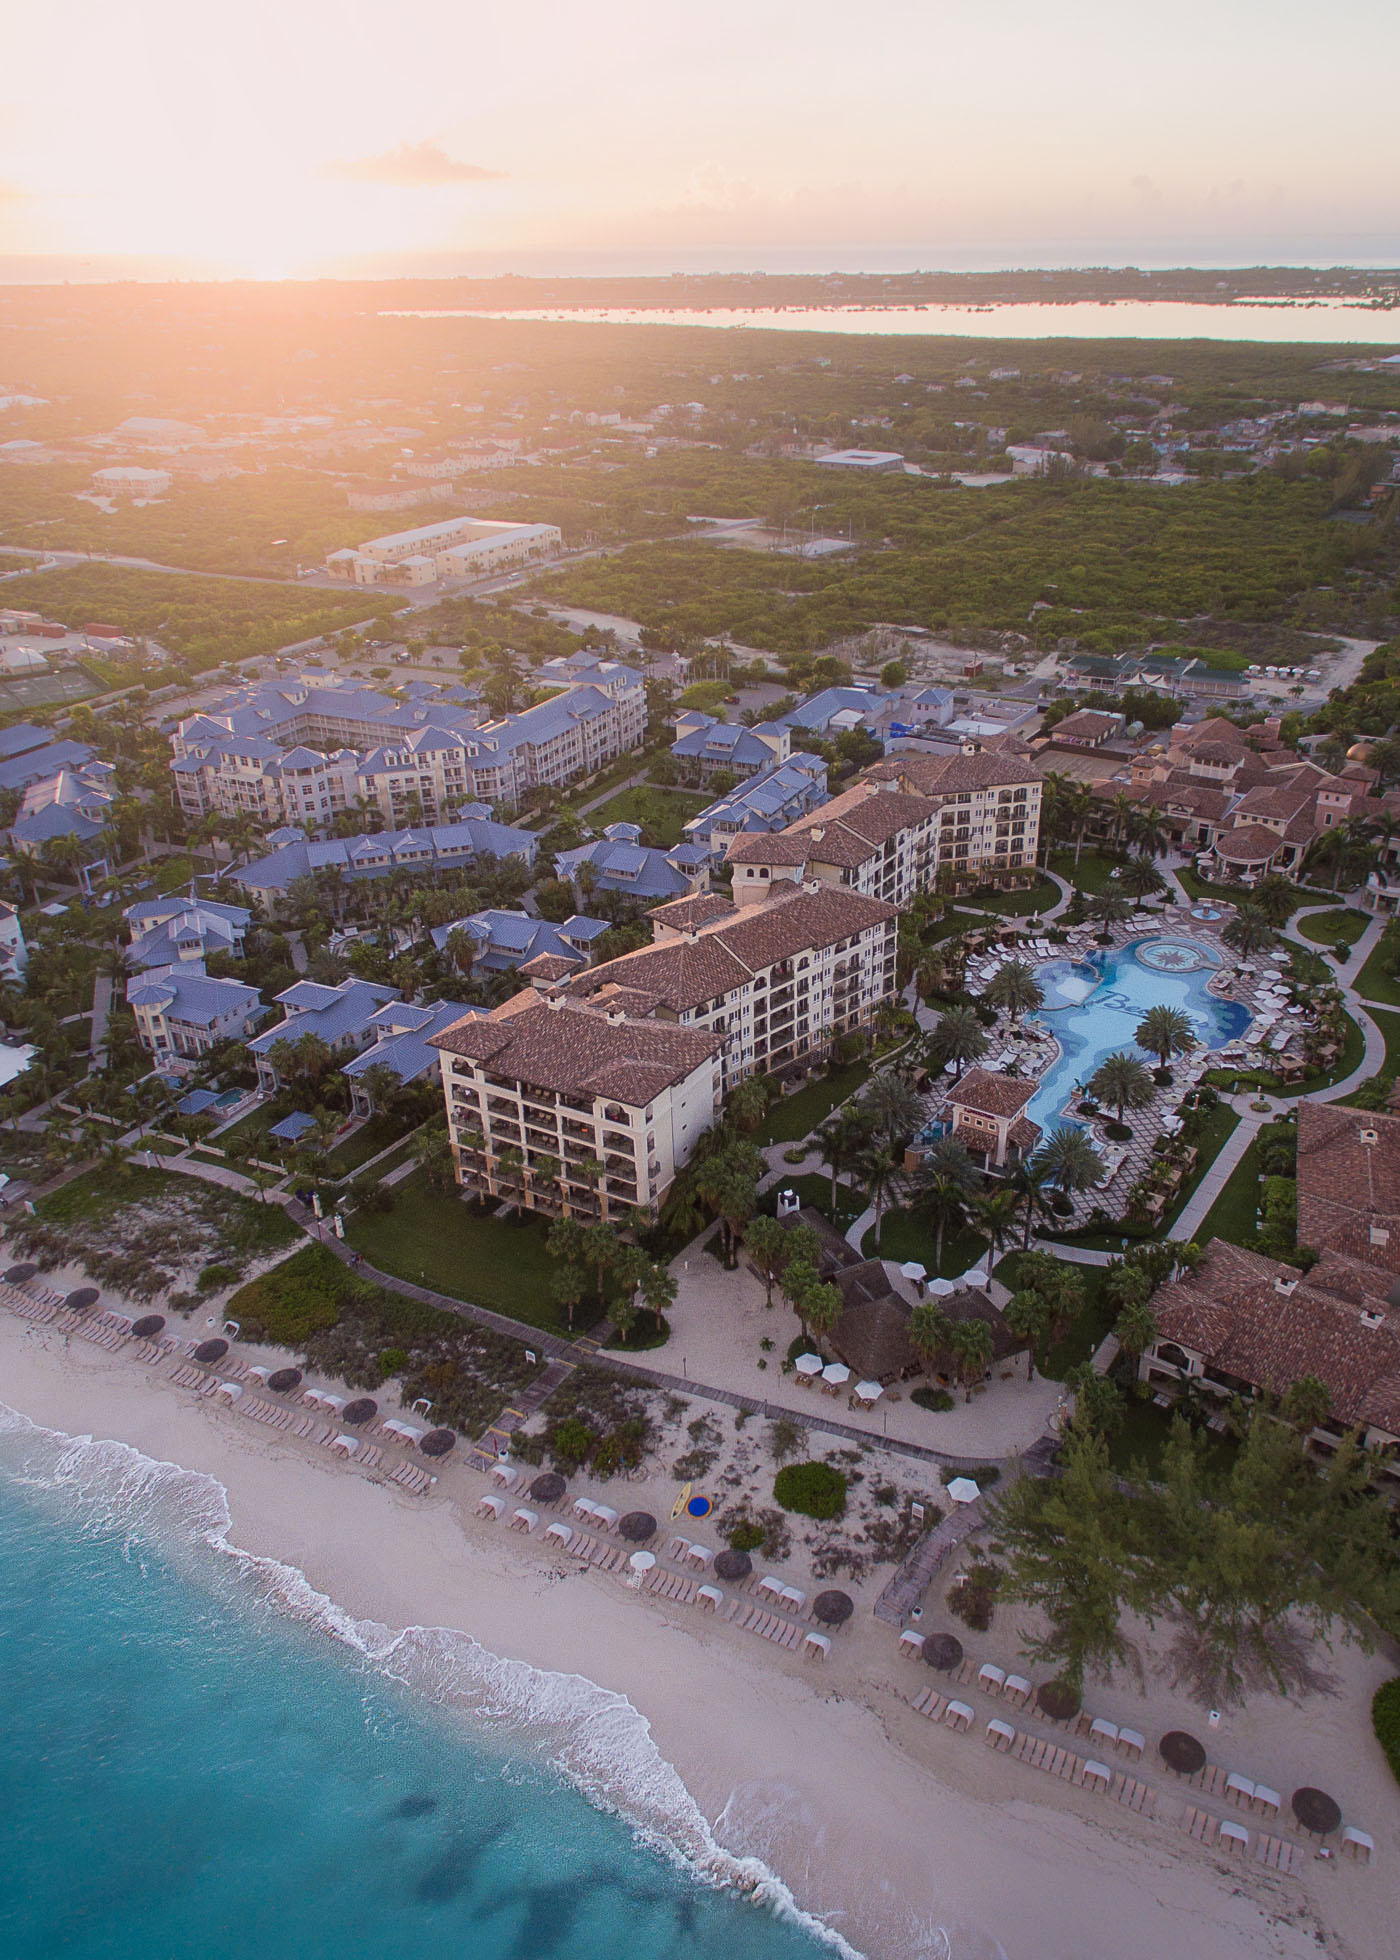 Sunrise at Beaches Resort Villages and Spa in Turks & Caicos